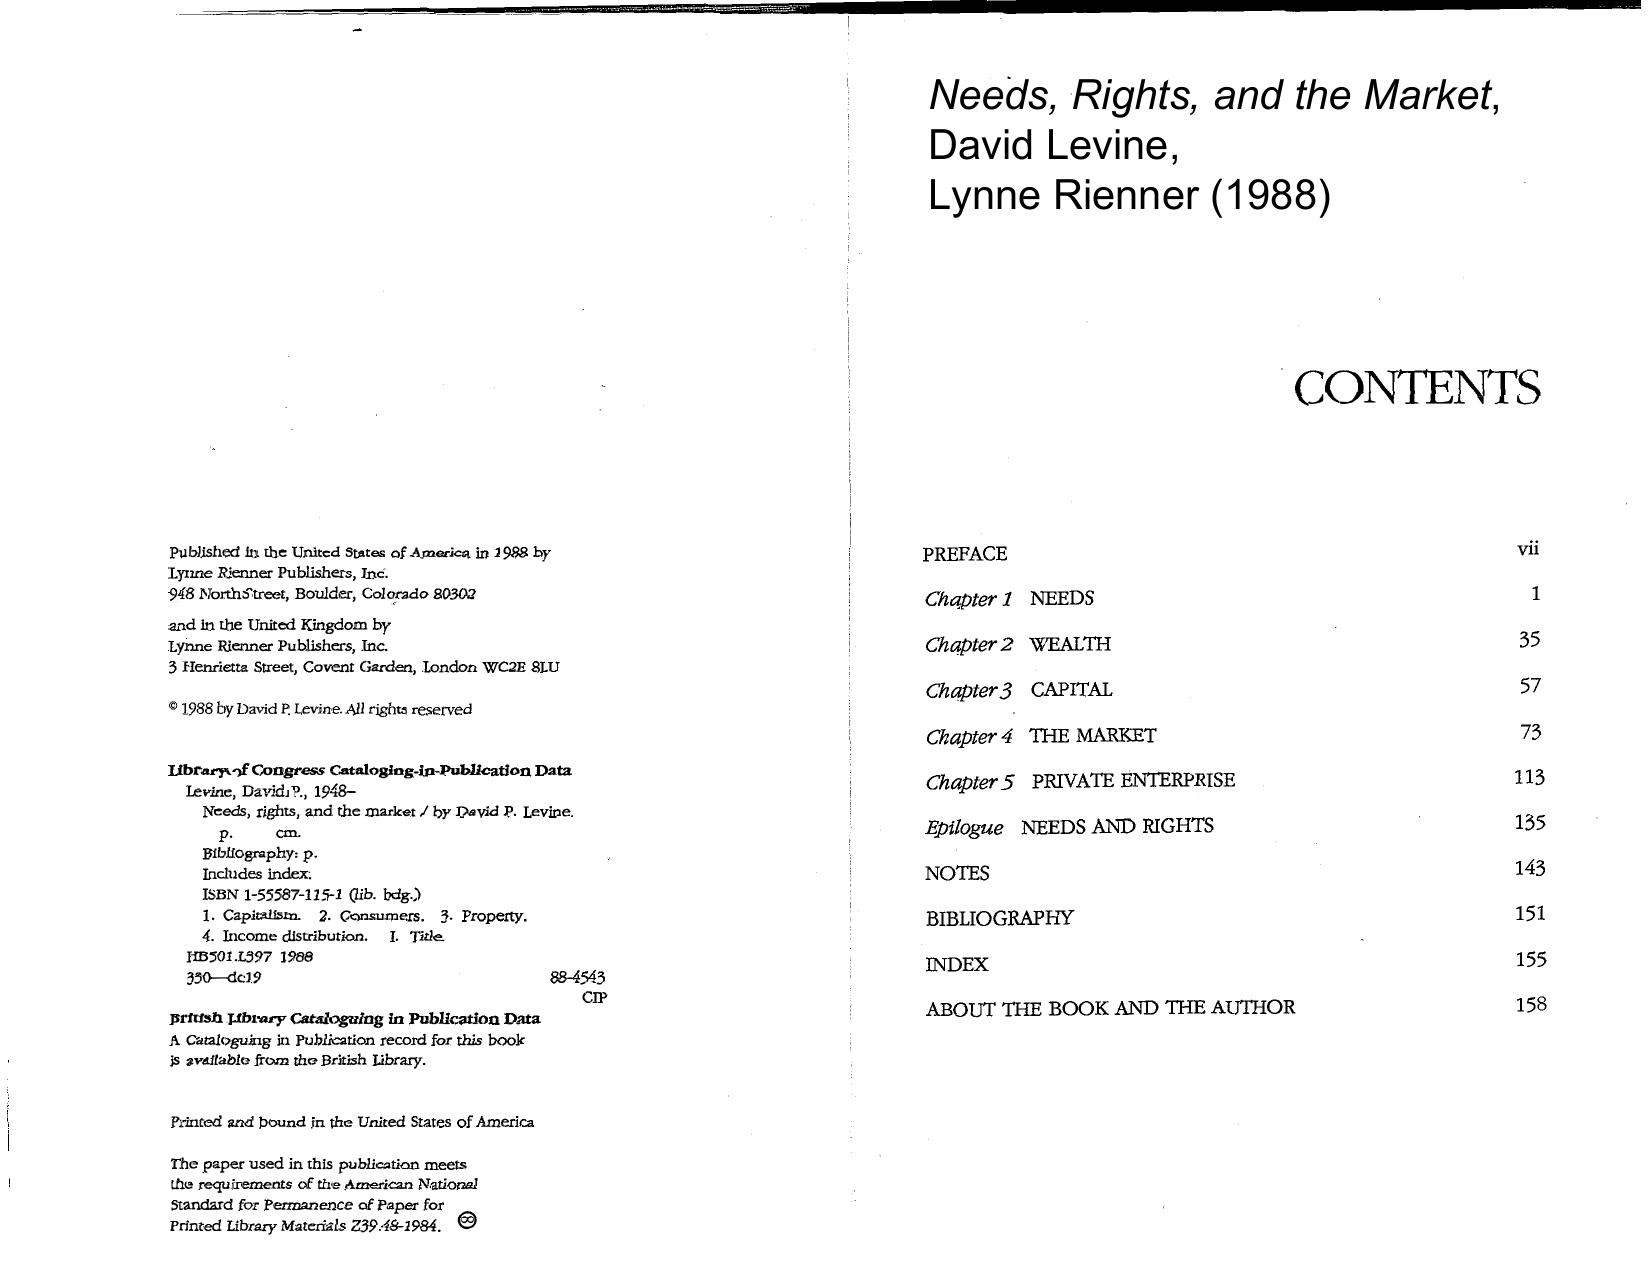 Needs, Rights, and the Market by David P. Levine